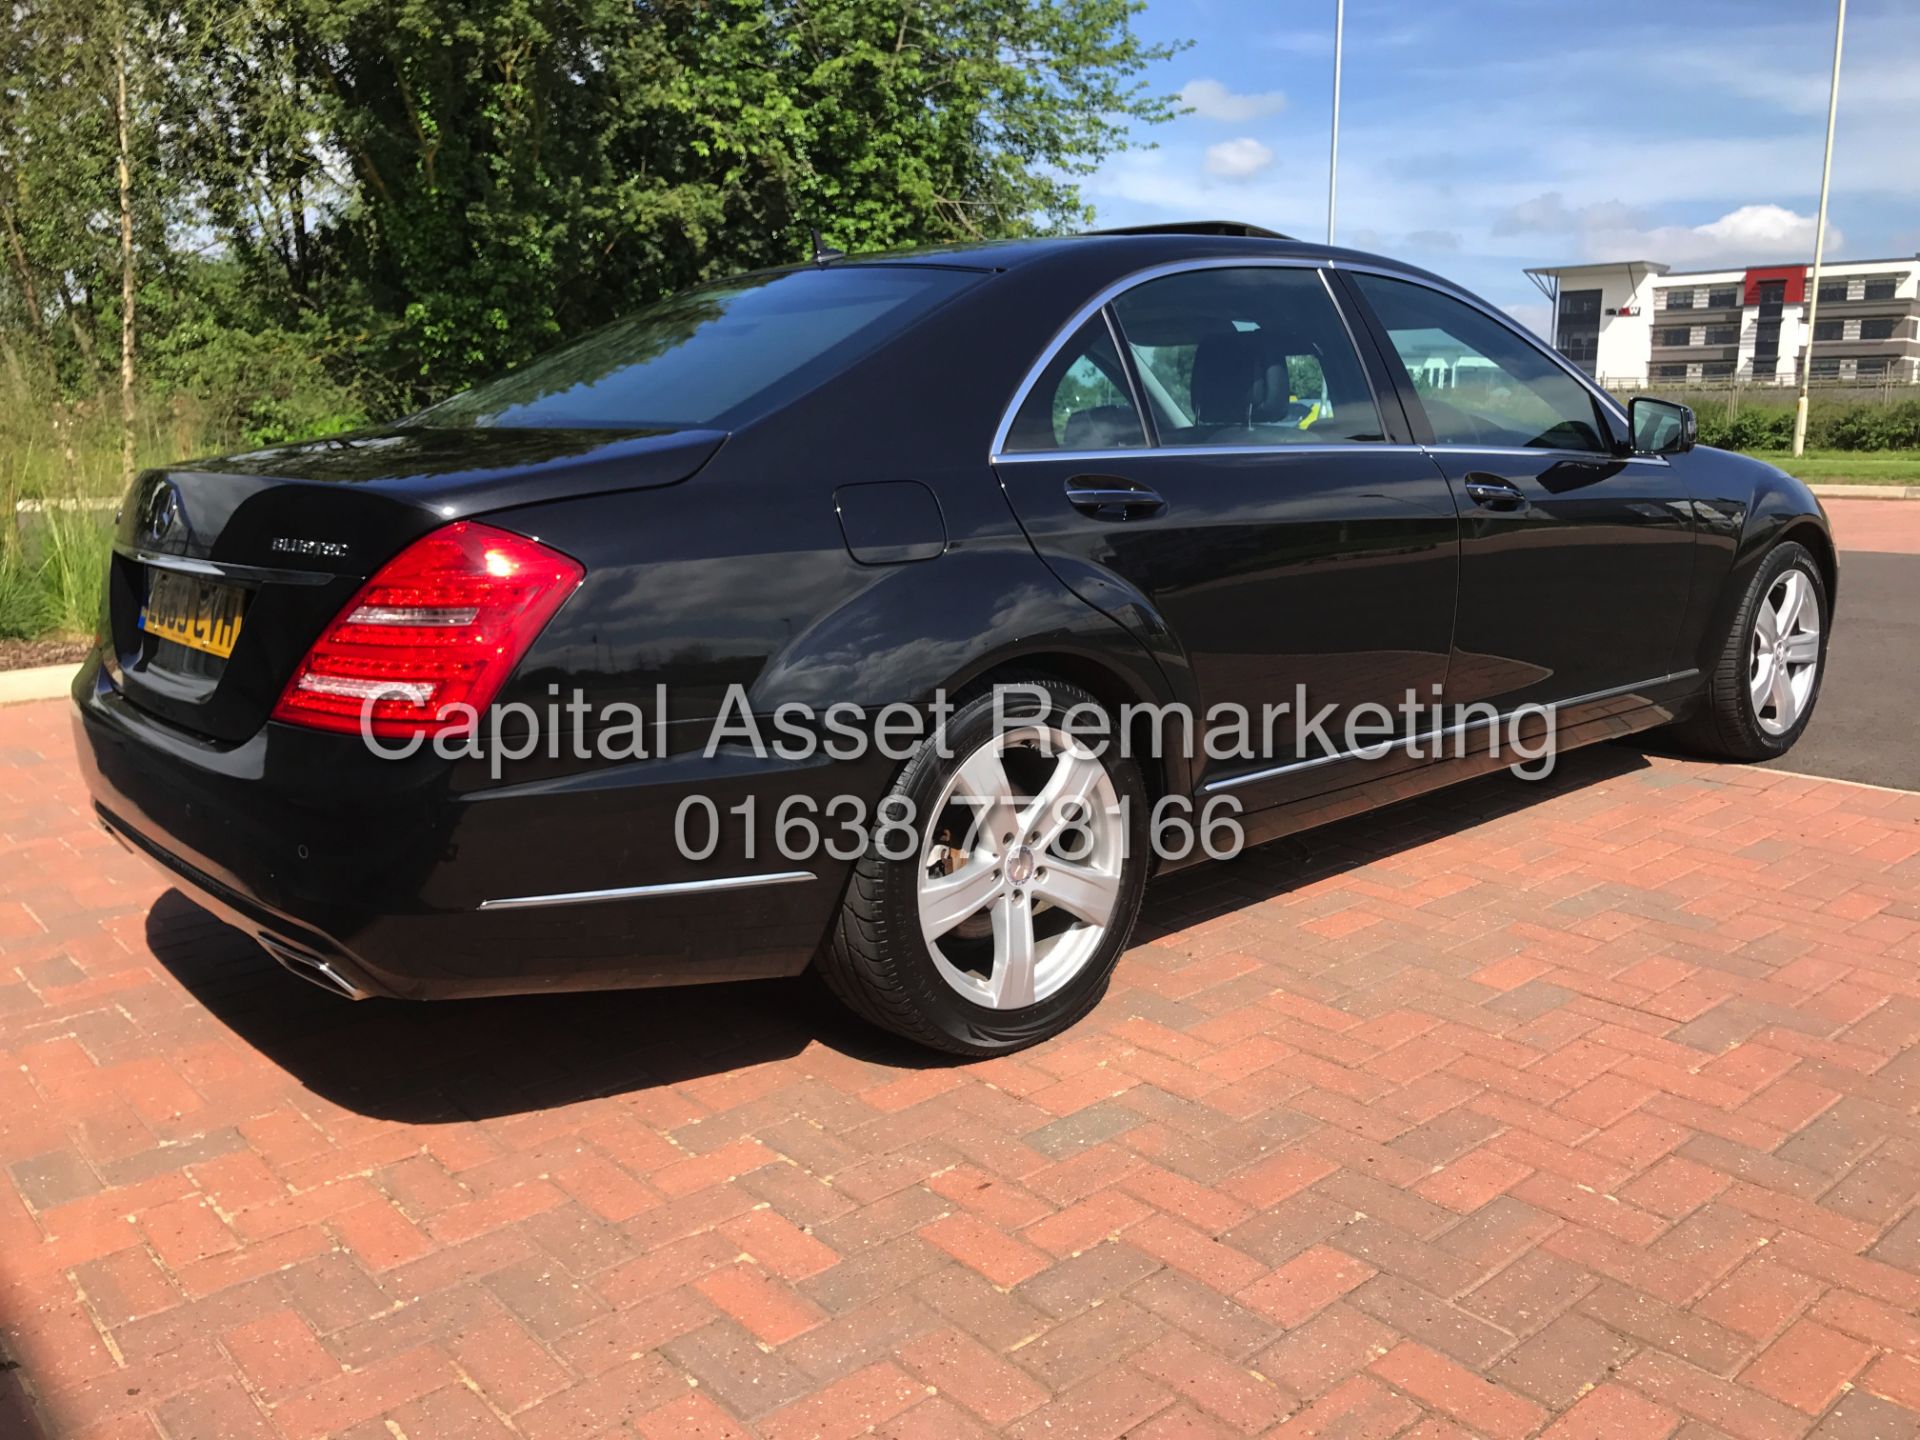 (ON SALE) MERCEDES S350CDI (2014 MODEL) LWB LIMO - SAT NAV - GLASS ROOF **ABSOLUTLY LOADED** - Image 9 of 37